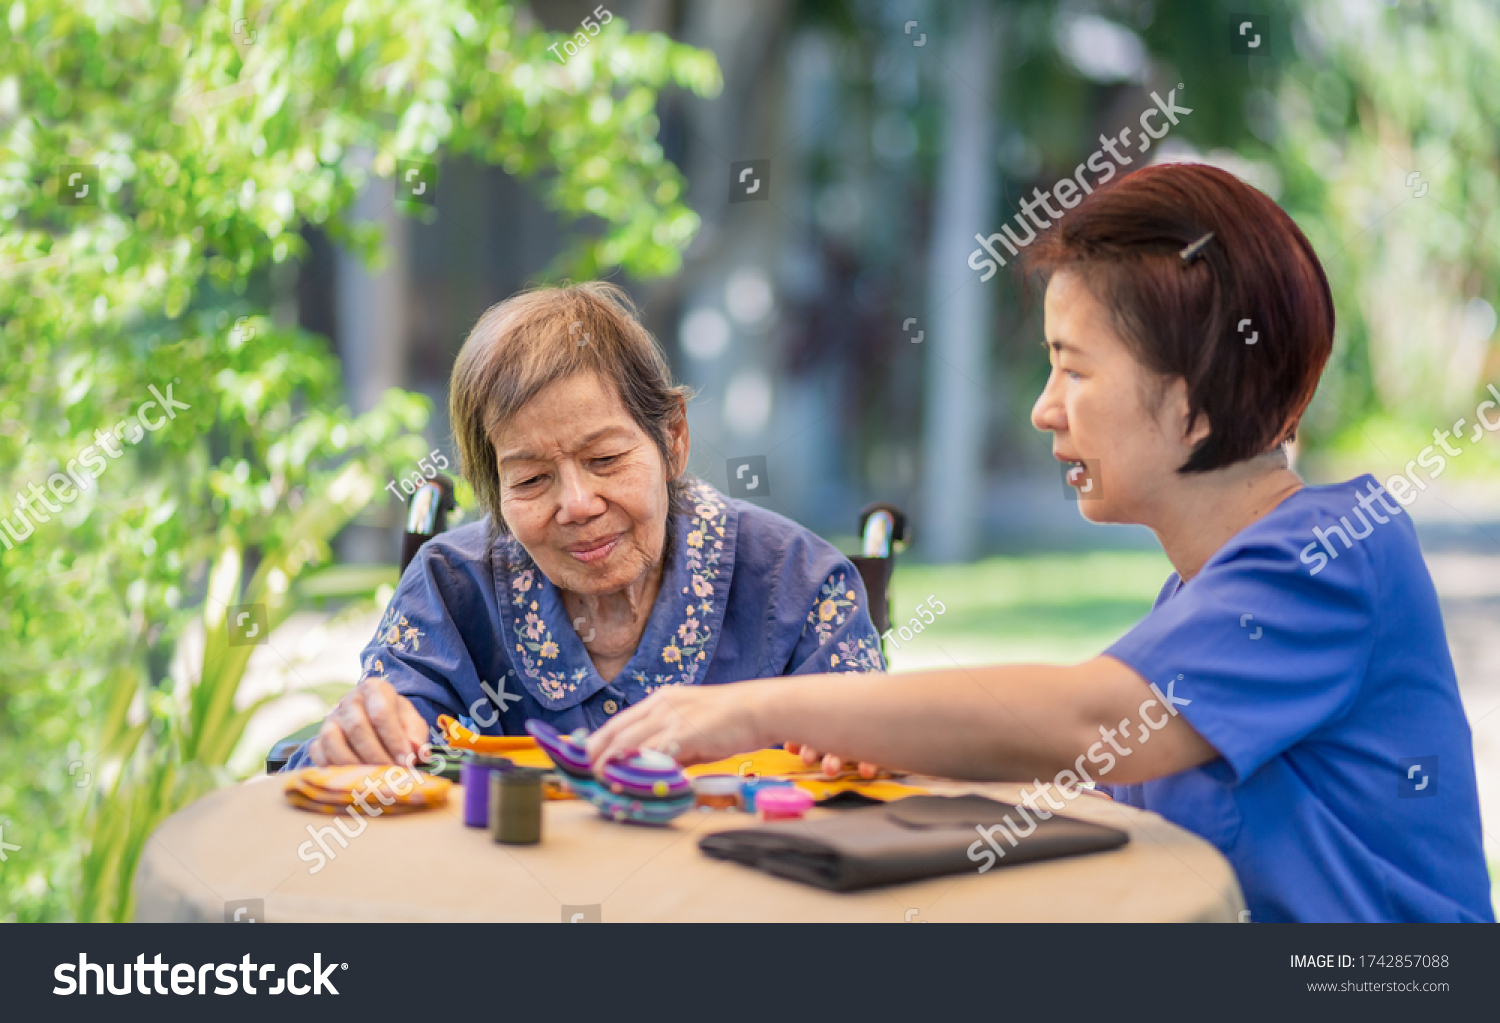 Elderly woman with caregiver in the needle crafts occupational therapy  for Alzheimer’s or dementia #1742857088